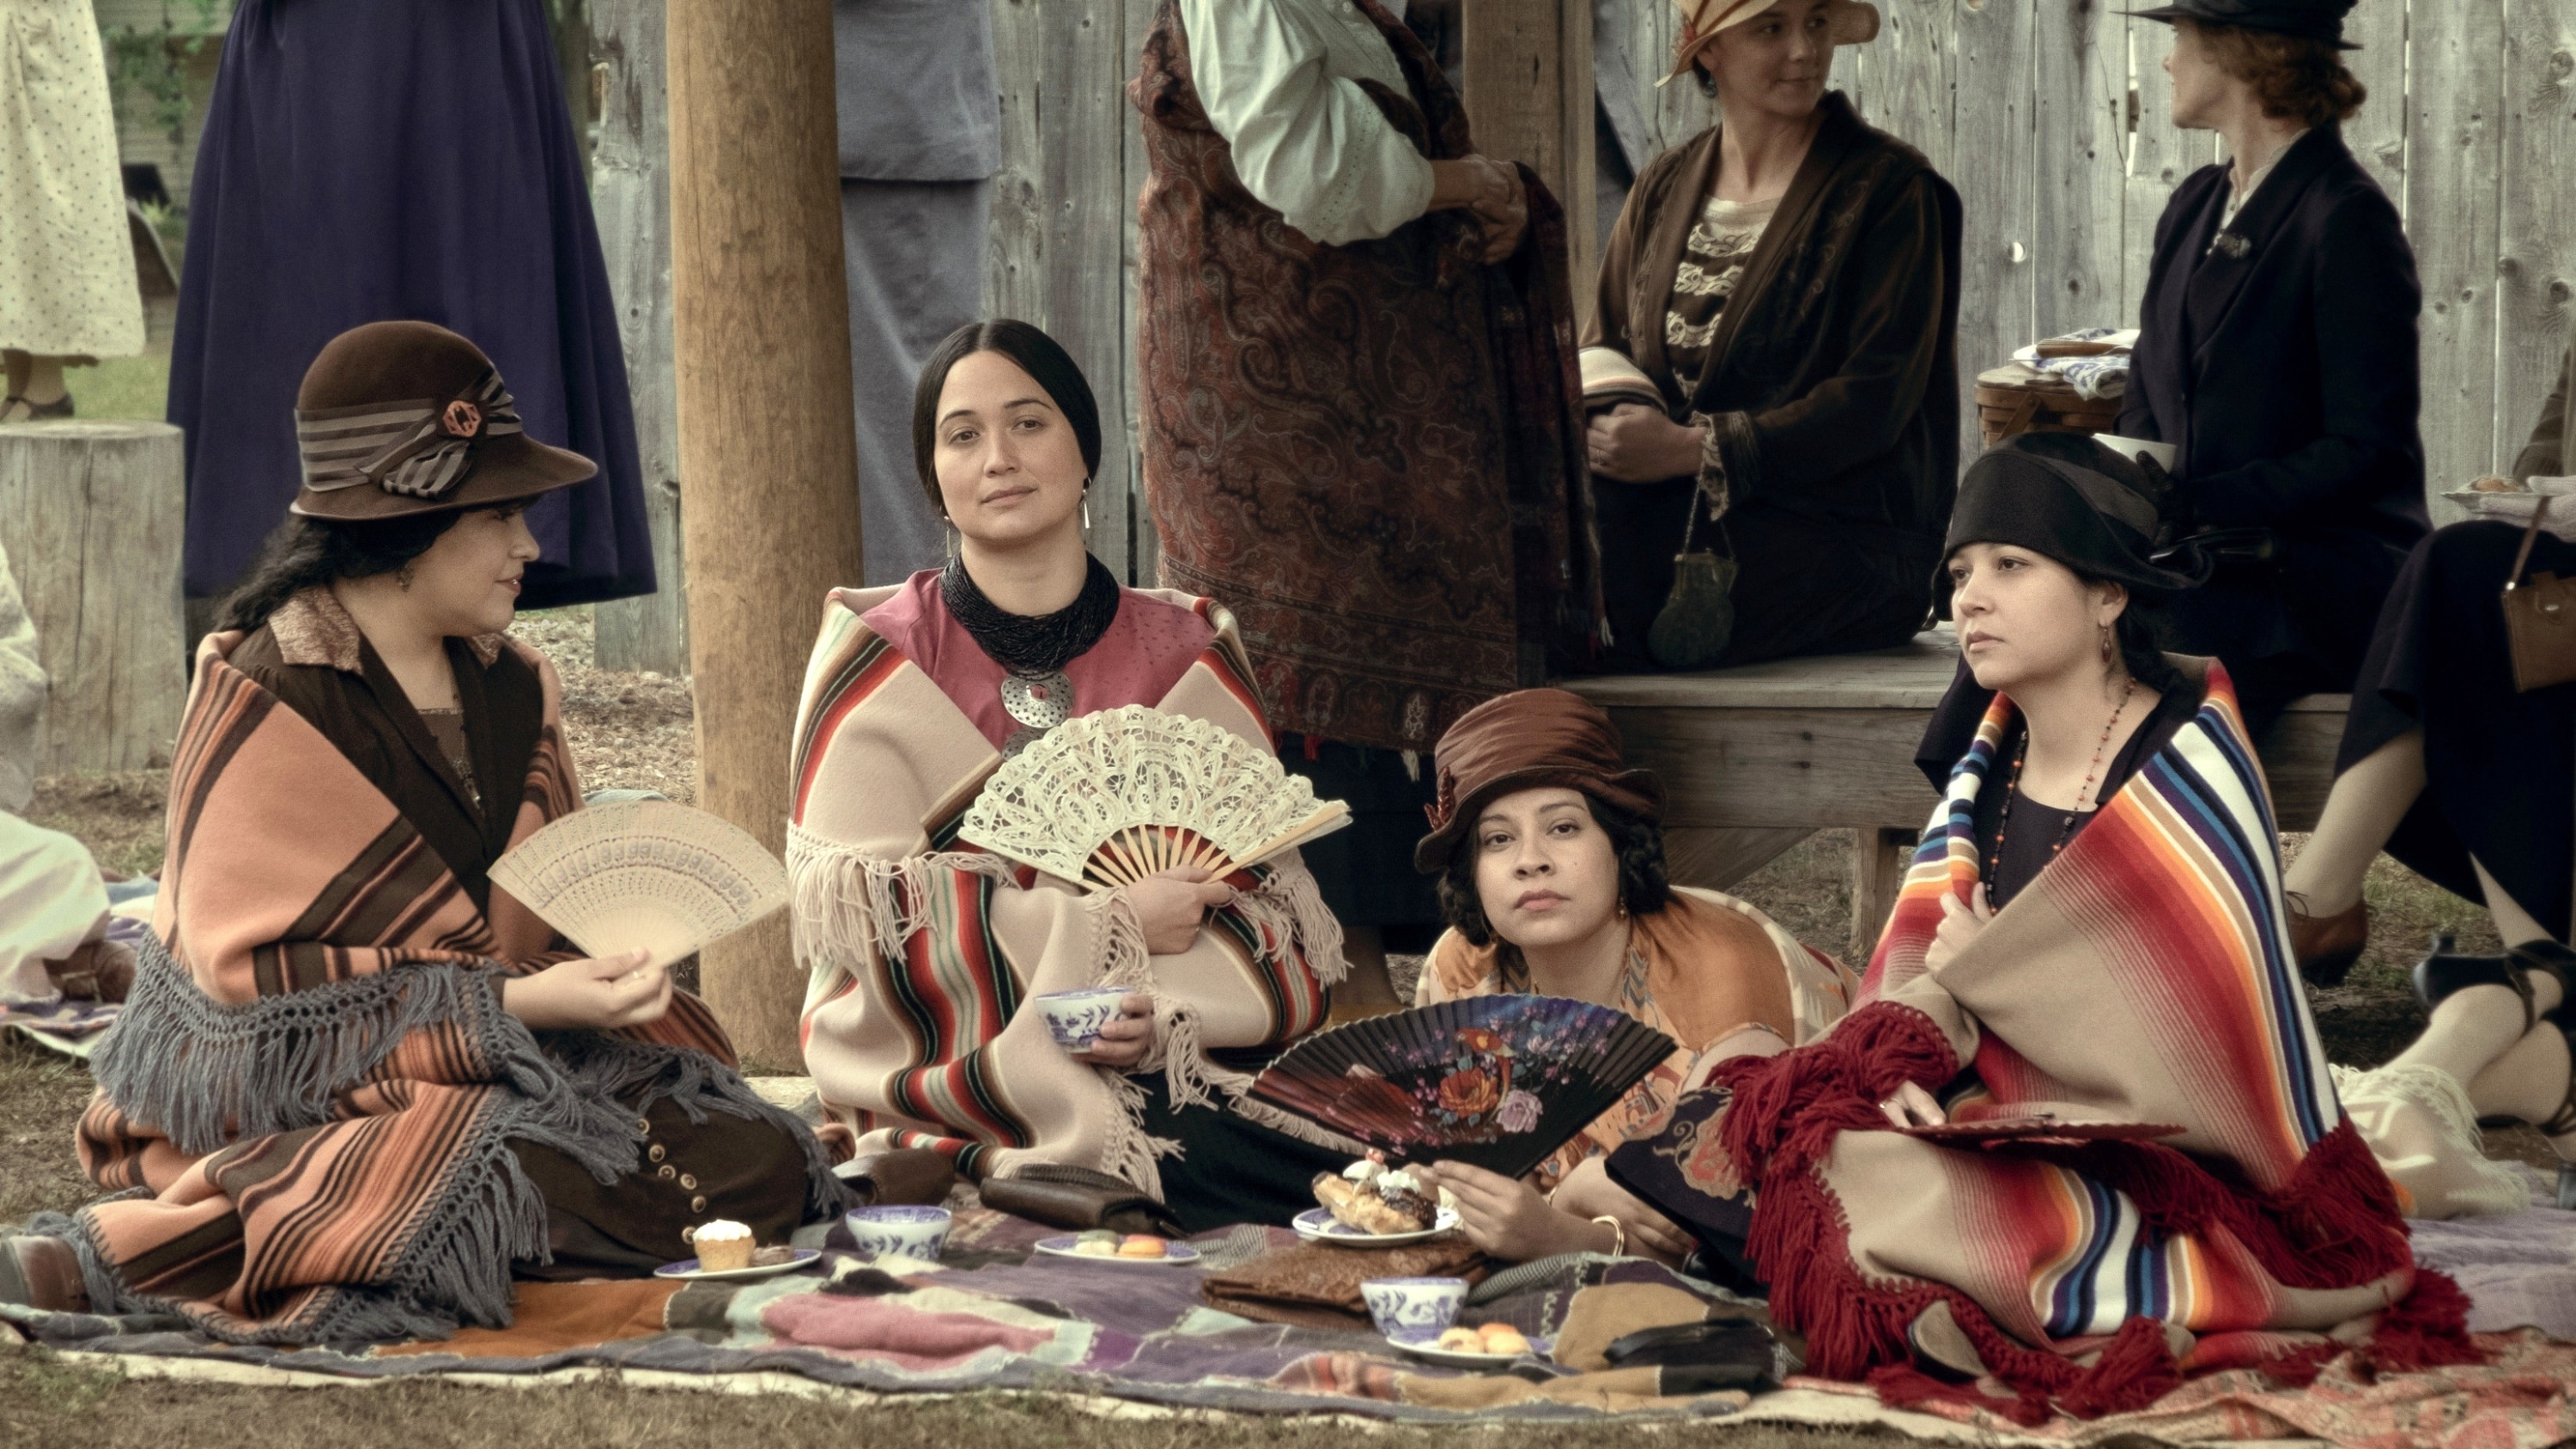 Lily sitting with other women in a scene from &quot;Killers of the Flower Moon&quot;